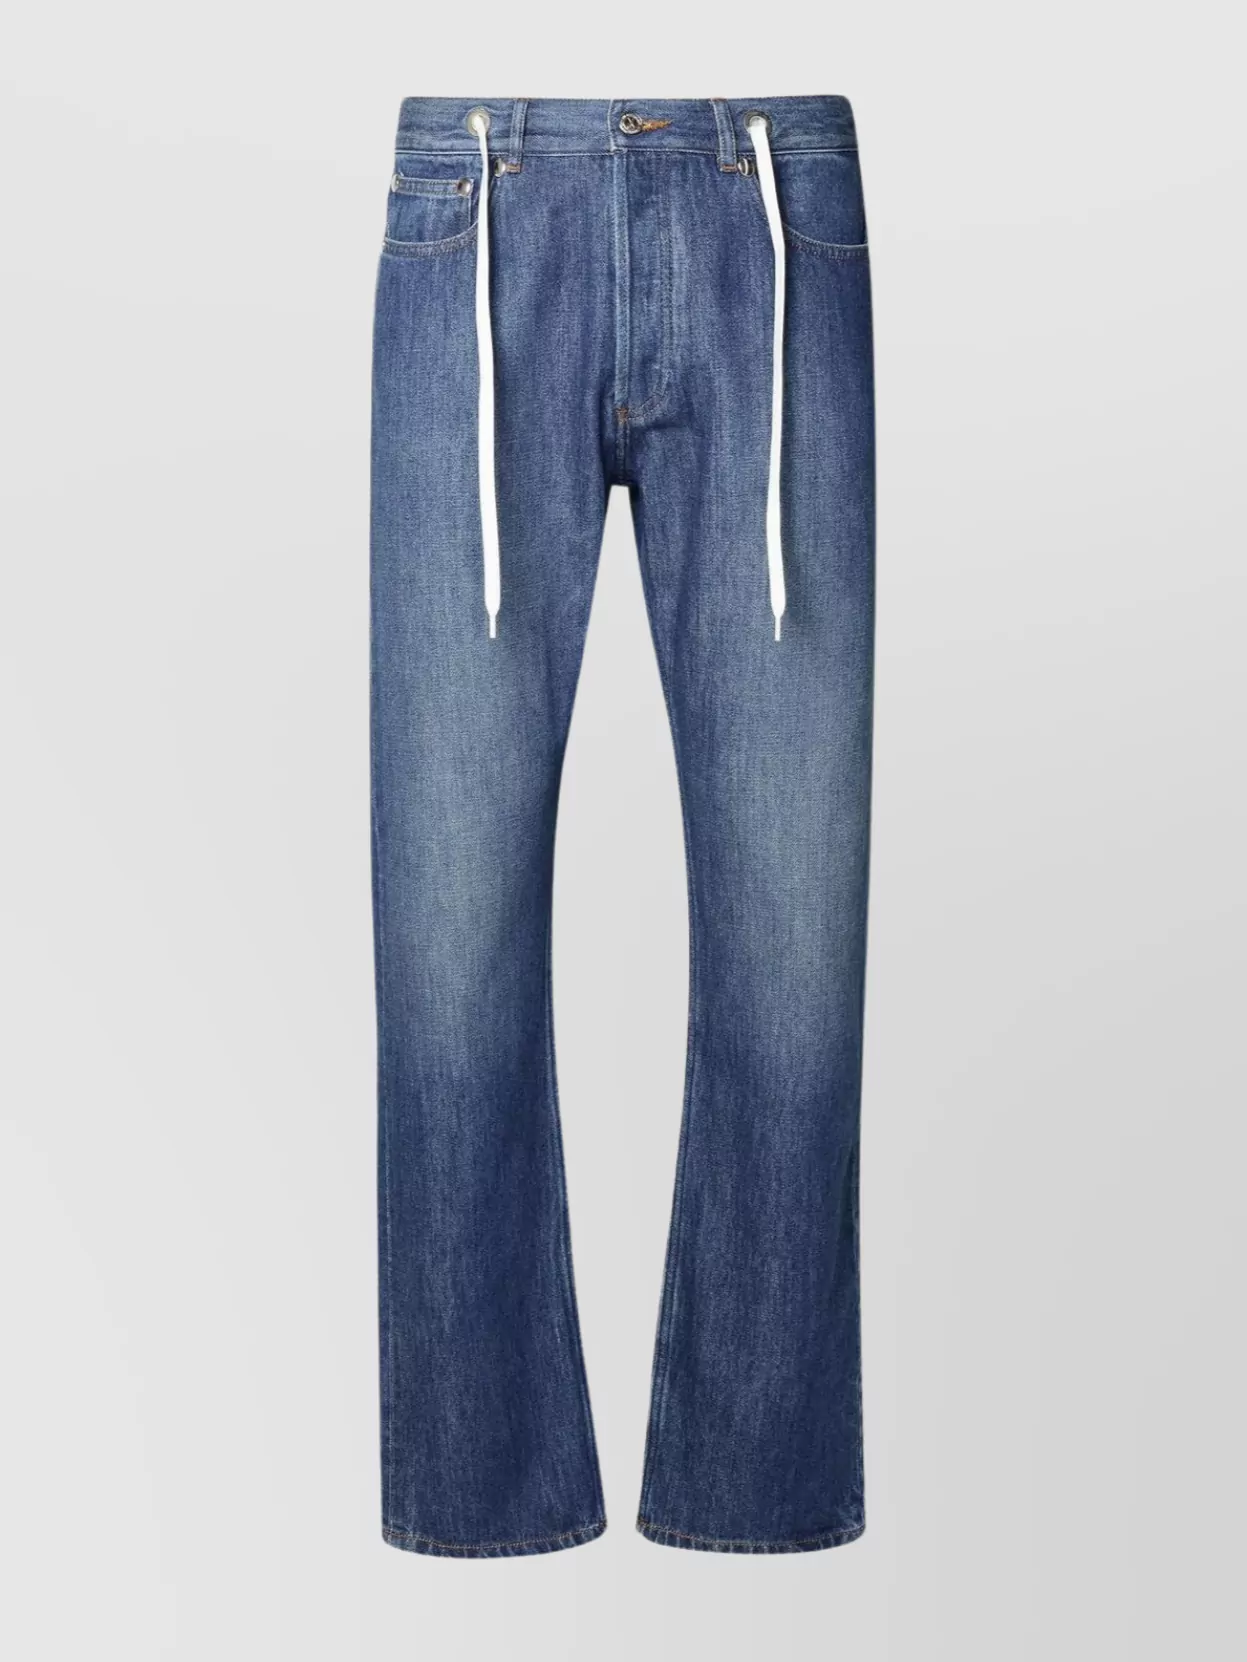 Shop Apc Cotton Jeans With Belt Loops And Drawstring Waist